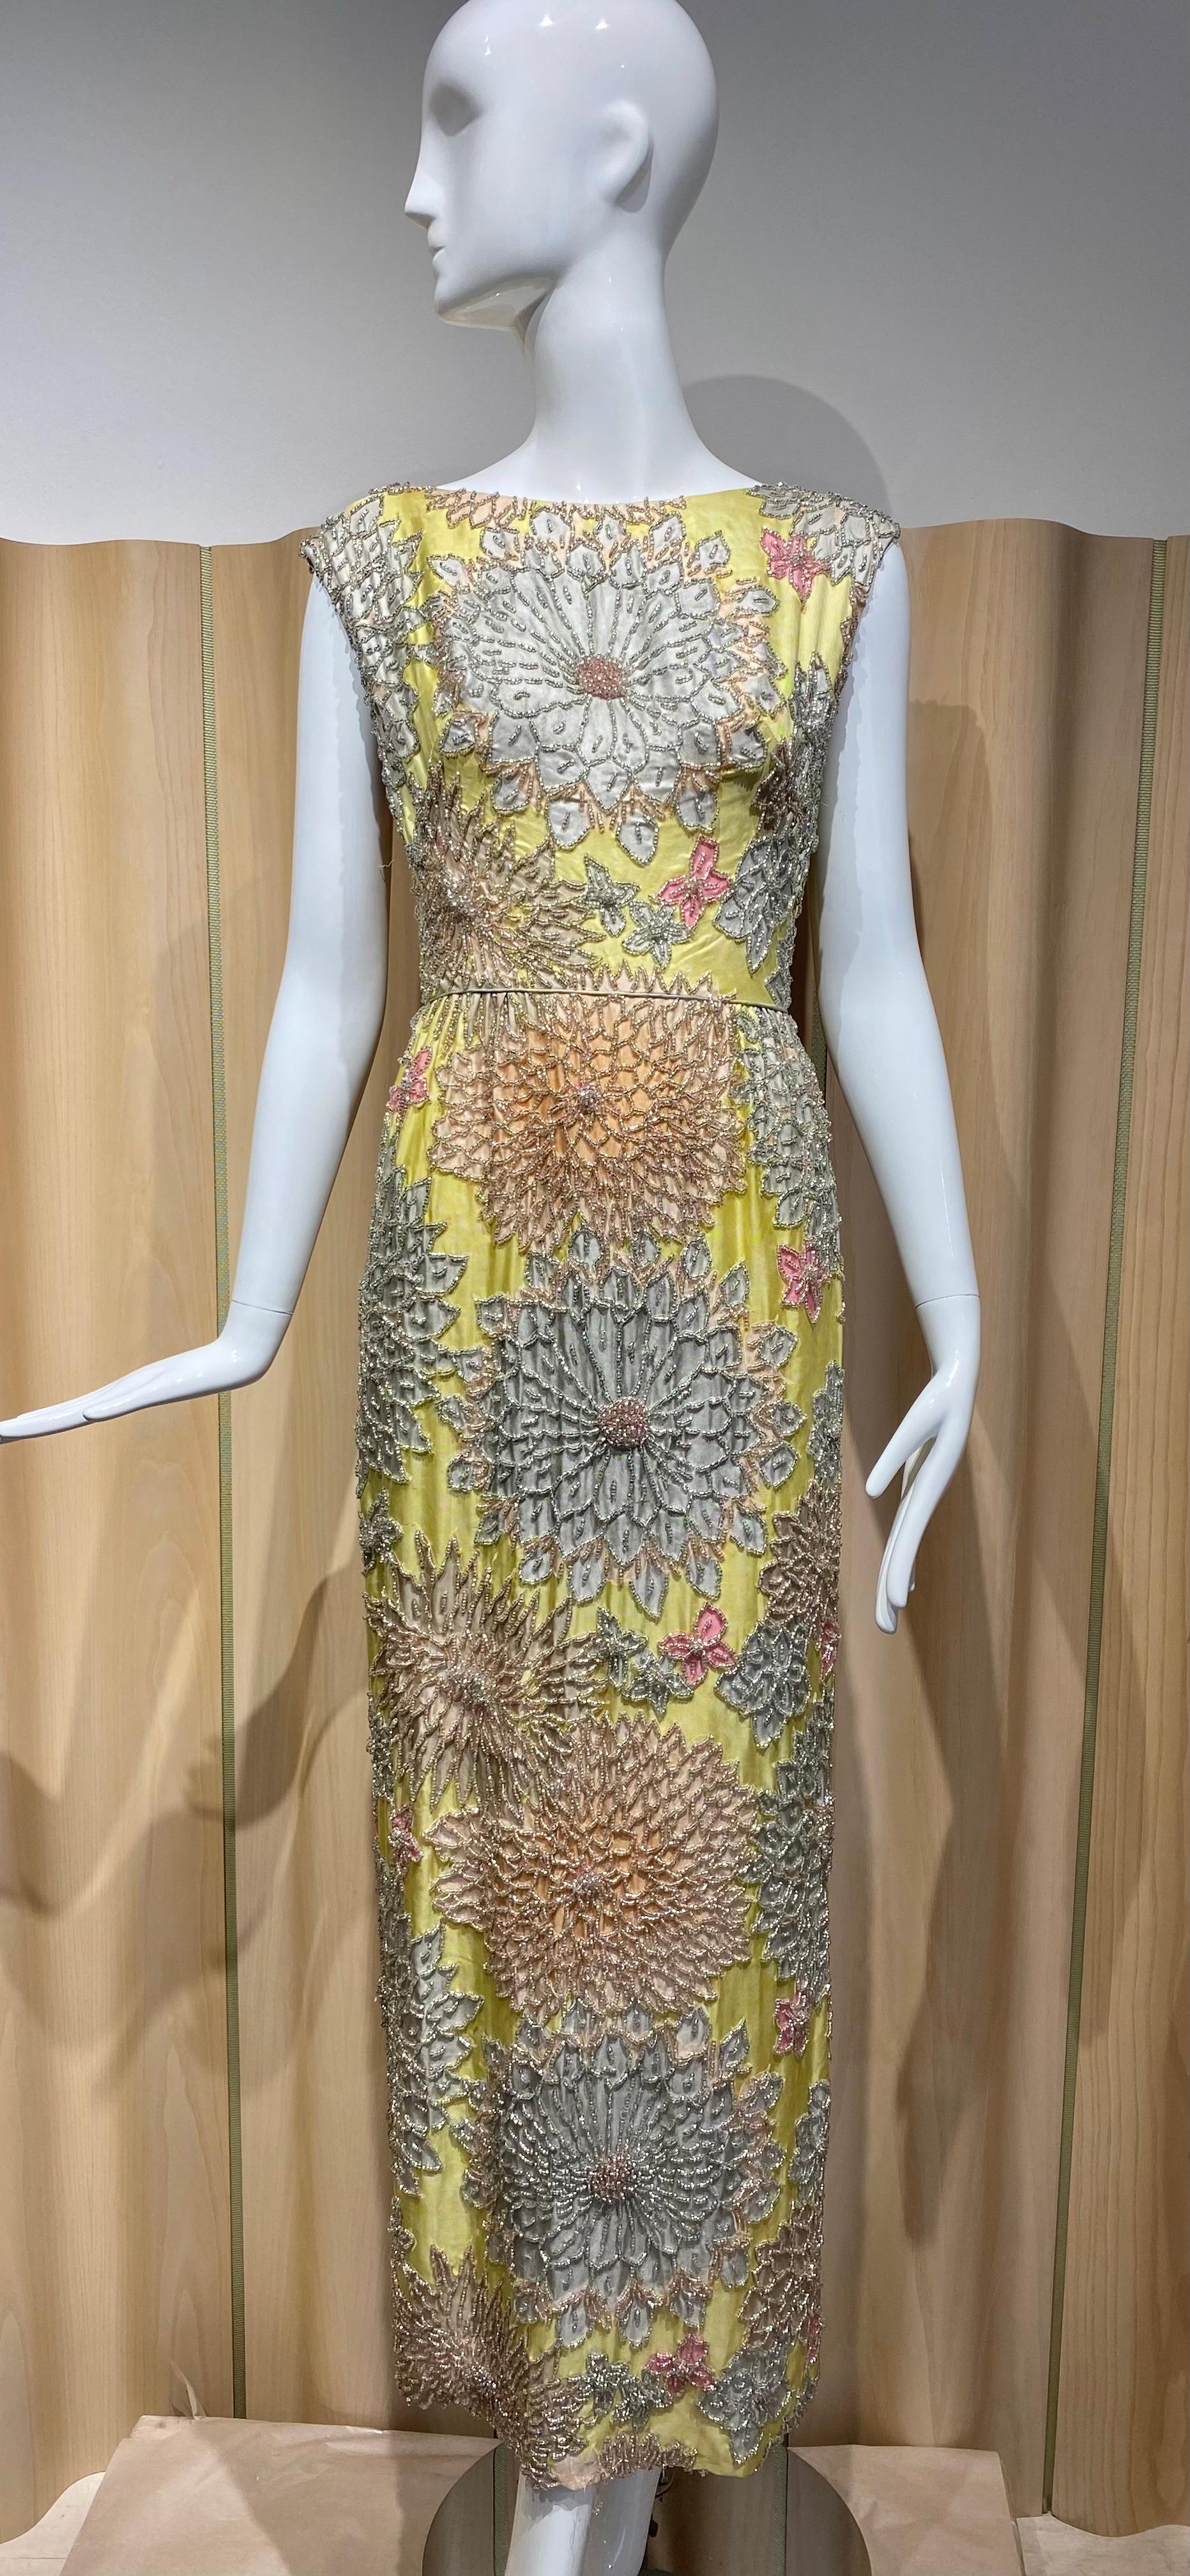 Elegant 1960s Yellow, Grey and Blue Floral Print beaded Sheath sleeveless cocktail dress. 
Fitted waist. 
Size 4
measurement:
B: 34/ Waist 26” / Hip 38”/ Length 52”
*** dress has some issues with loose threads. 
see image attached.